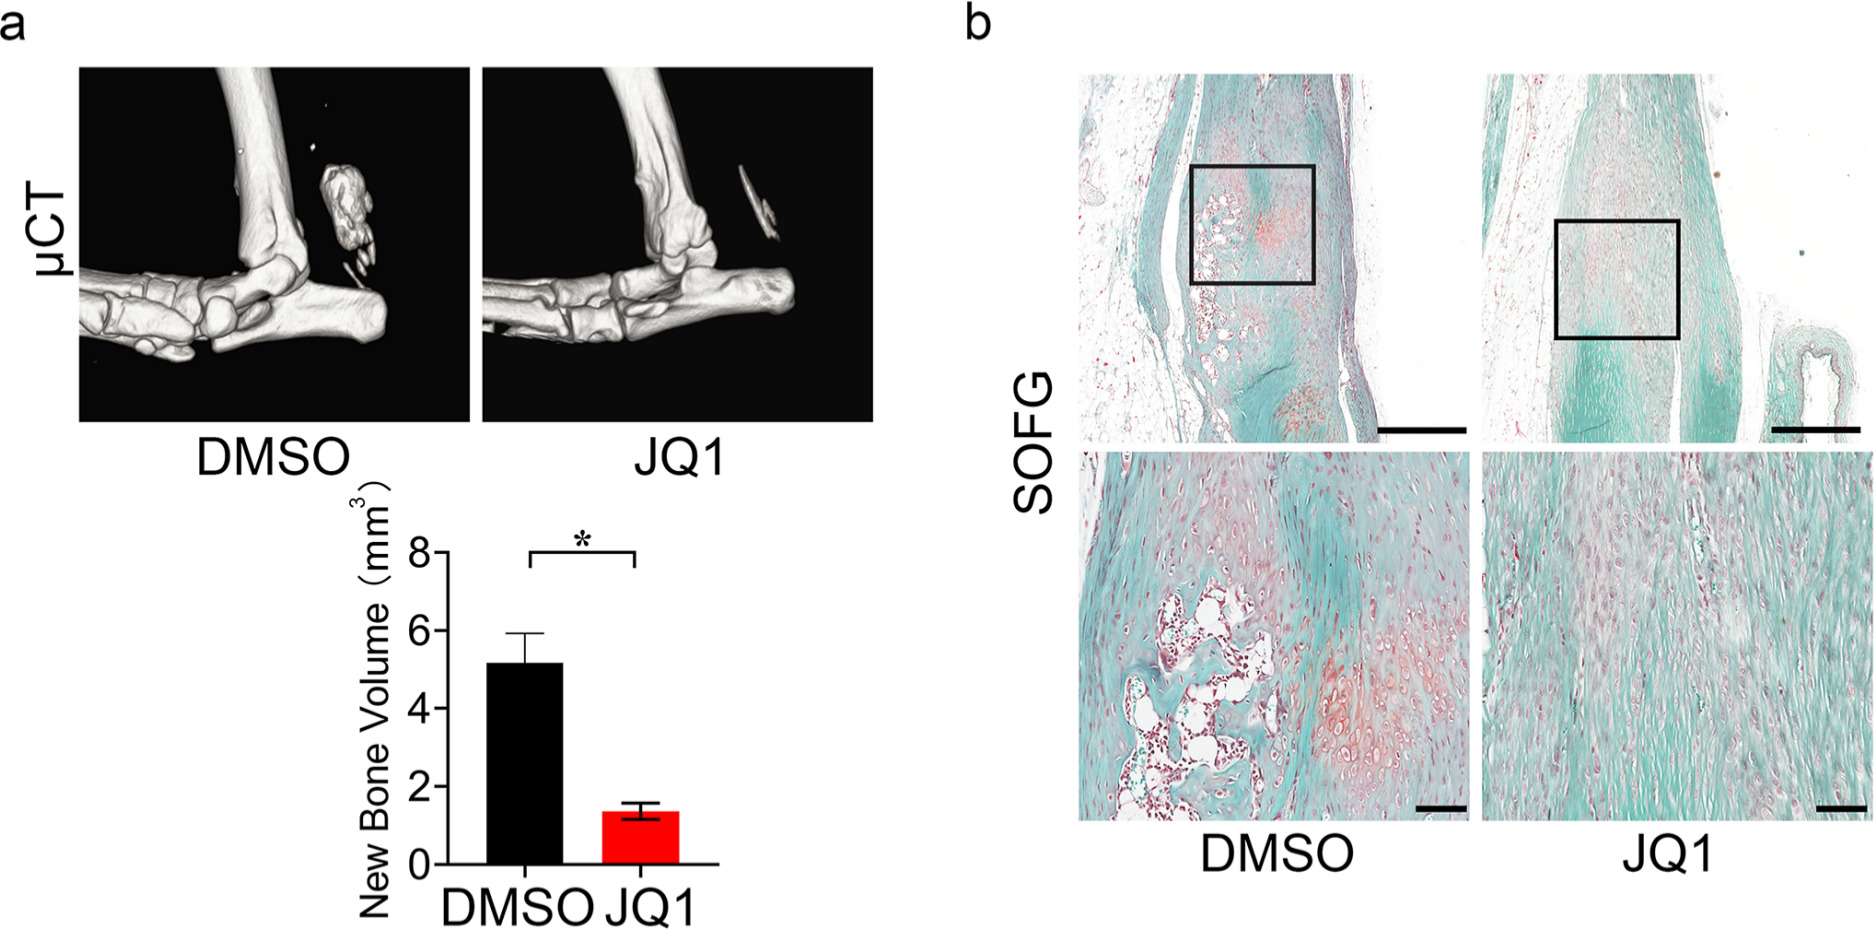 Fig. 4 
            JQ1 attenuates heterotopic ossification (HO) in vivo. a) Micro-CT (μCT) analysis and quantification of new bone in HO model treated with dimethyl sulfoxide (DMSO) or JQ1, n = 10. b) Safranin O Fast Green (SOFG) staining of HO model treated with DMSO or JQ1. Scale bar = 200 μm (upper panel), scale bar = 80 μm (zoom in image on the lower panel).
          